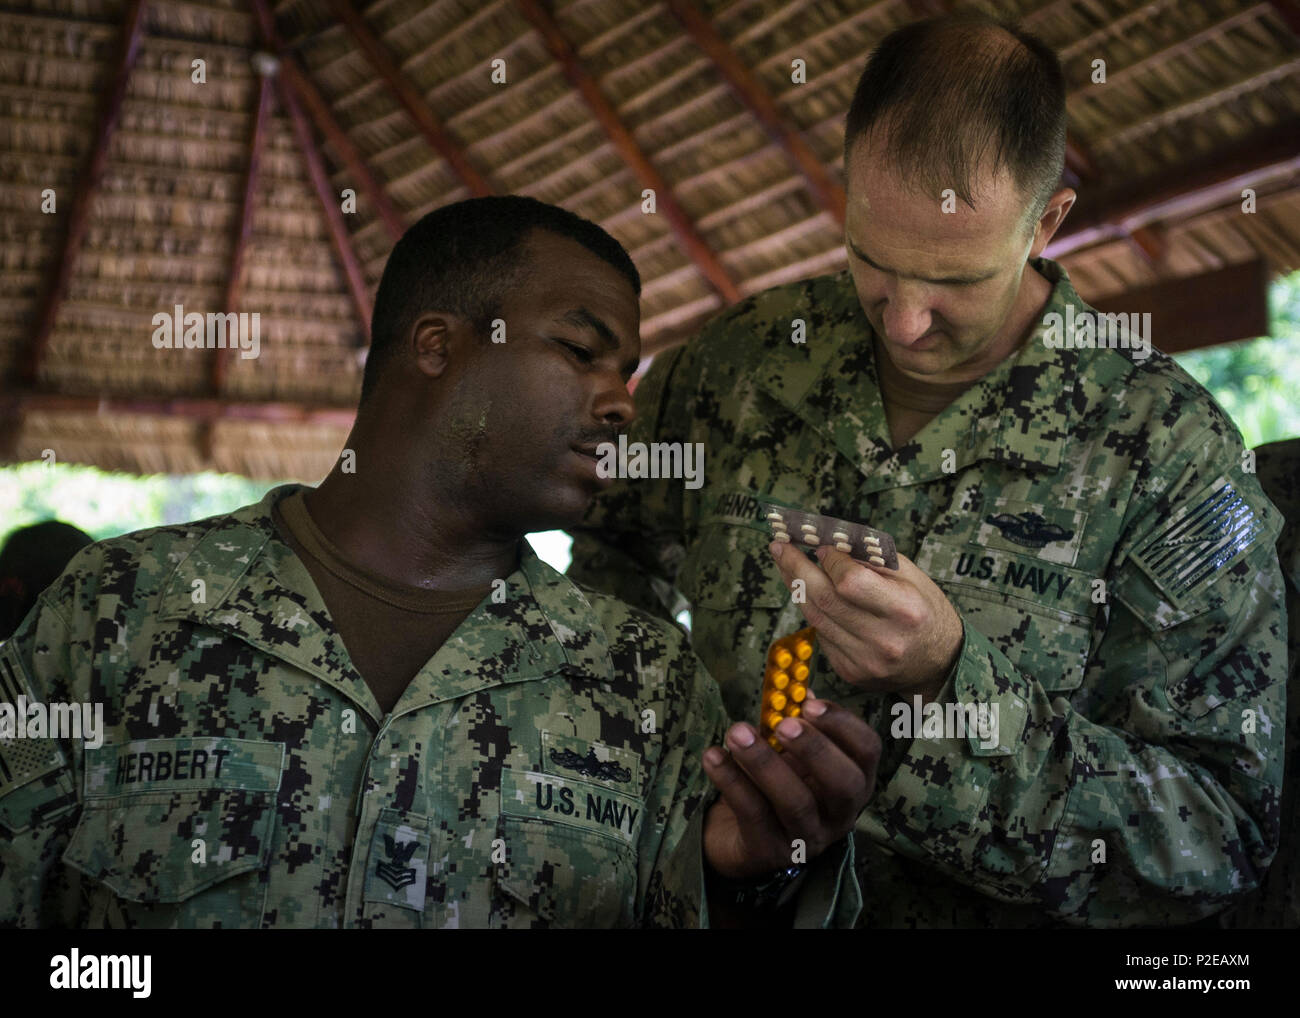 CABANAS, El Salvador (Sep. 1, 2016) - Hospital Corpsman 1st Class Hasson Herbert, a preventive medicine technician, left, and Lt. Christian Johnroe, an environmental health officer, both assigned to Naval Environmental Preventive Medicine Unit 2, help Operation Blessing’s Medical Brigade set up a temporary pharmacy station in Chalatenango, El Salvador during Southern Partnership Station 2016 (SPS 16). Operation Blessing’s Medical Brigade is a nonprofit mobile patient care unit established to provide medical service to those affected by natural disasters and render aid to rural areas. SPS-16 is Stock Photo